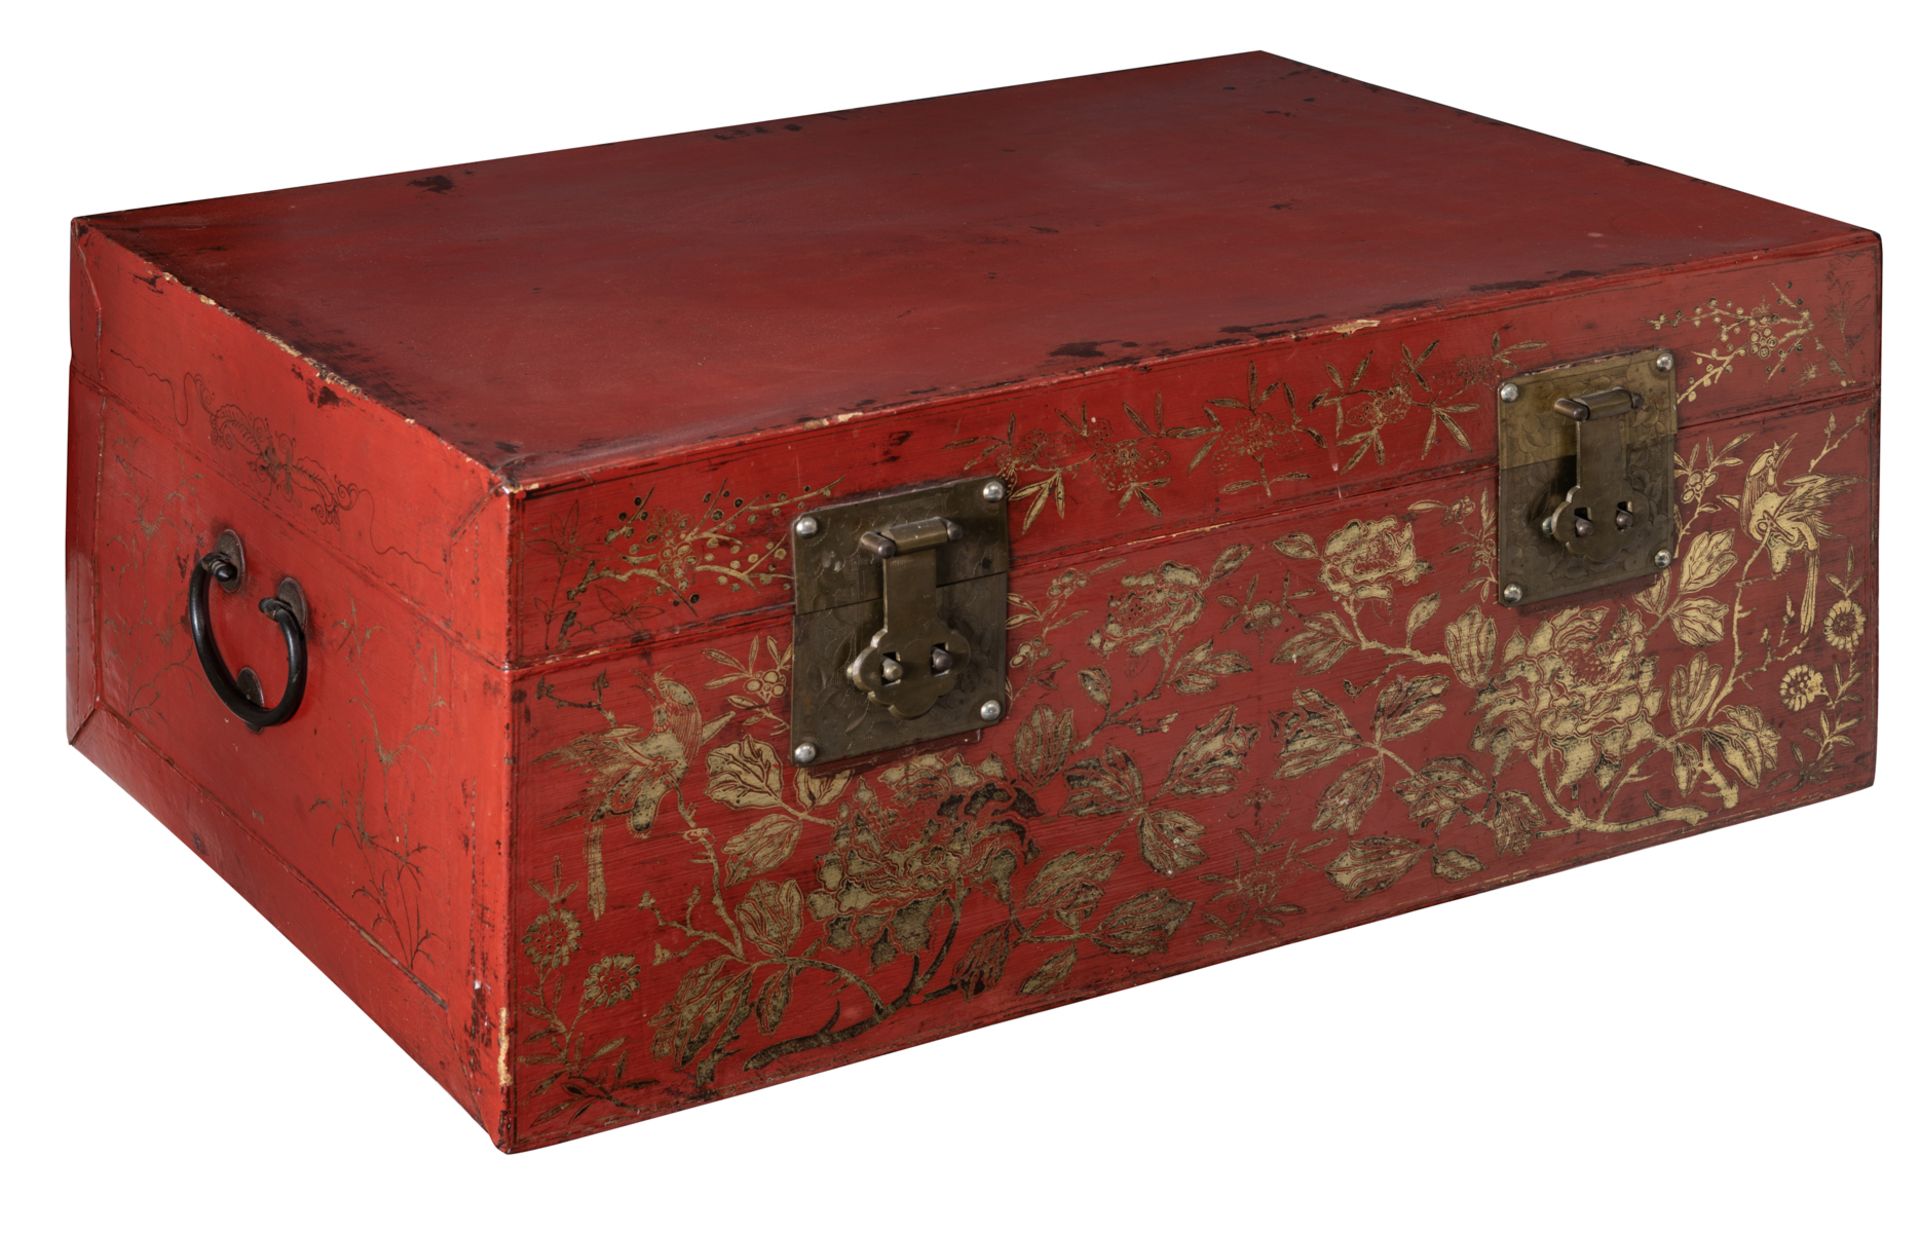 An Oriental red lacquered storage trunk, the front gilt decorated with birds and flower branches, th